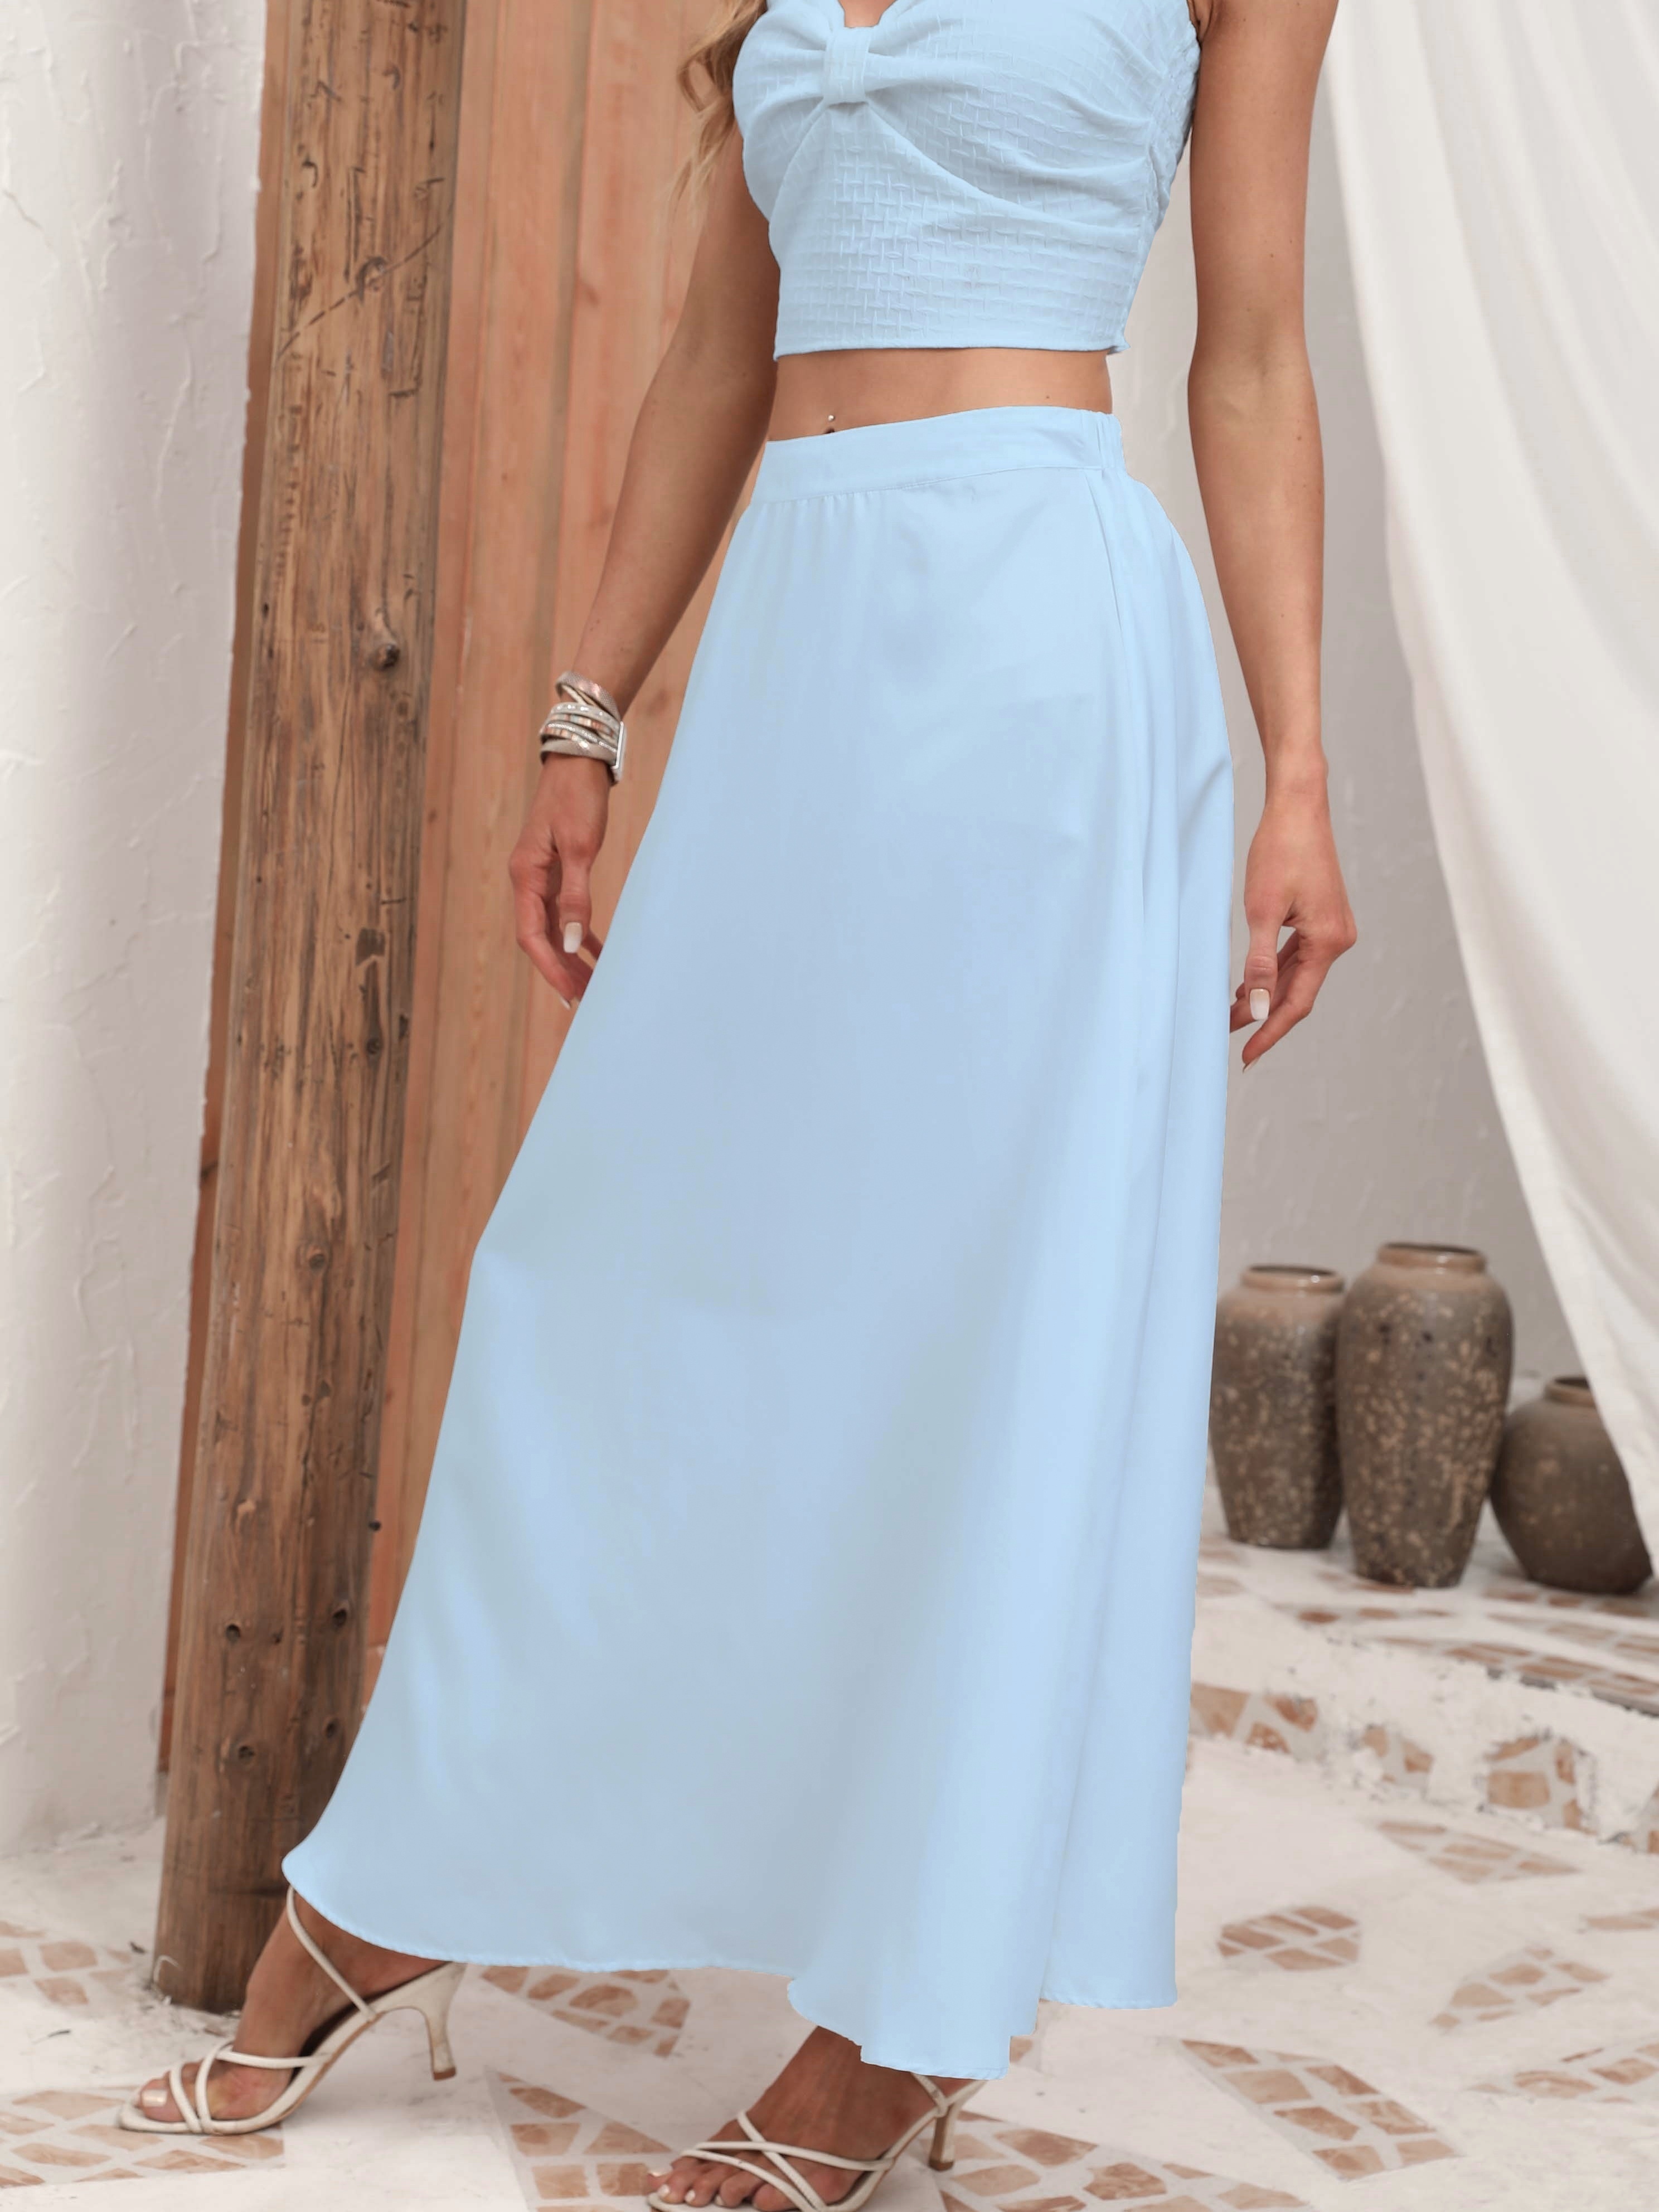 solid simple skirts elegant high waist flared maxi skirts womens clothing